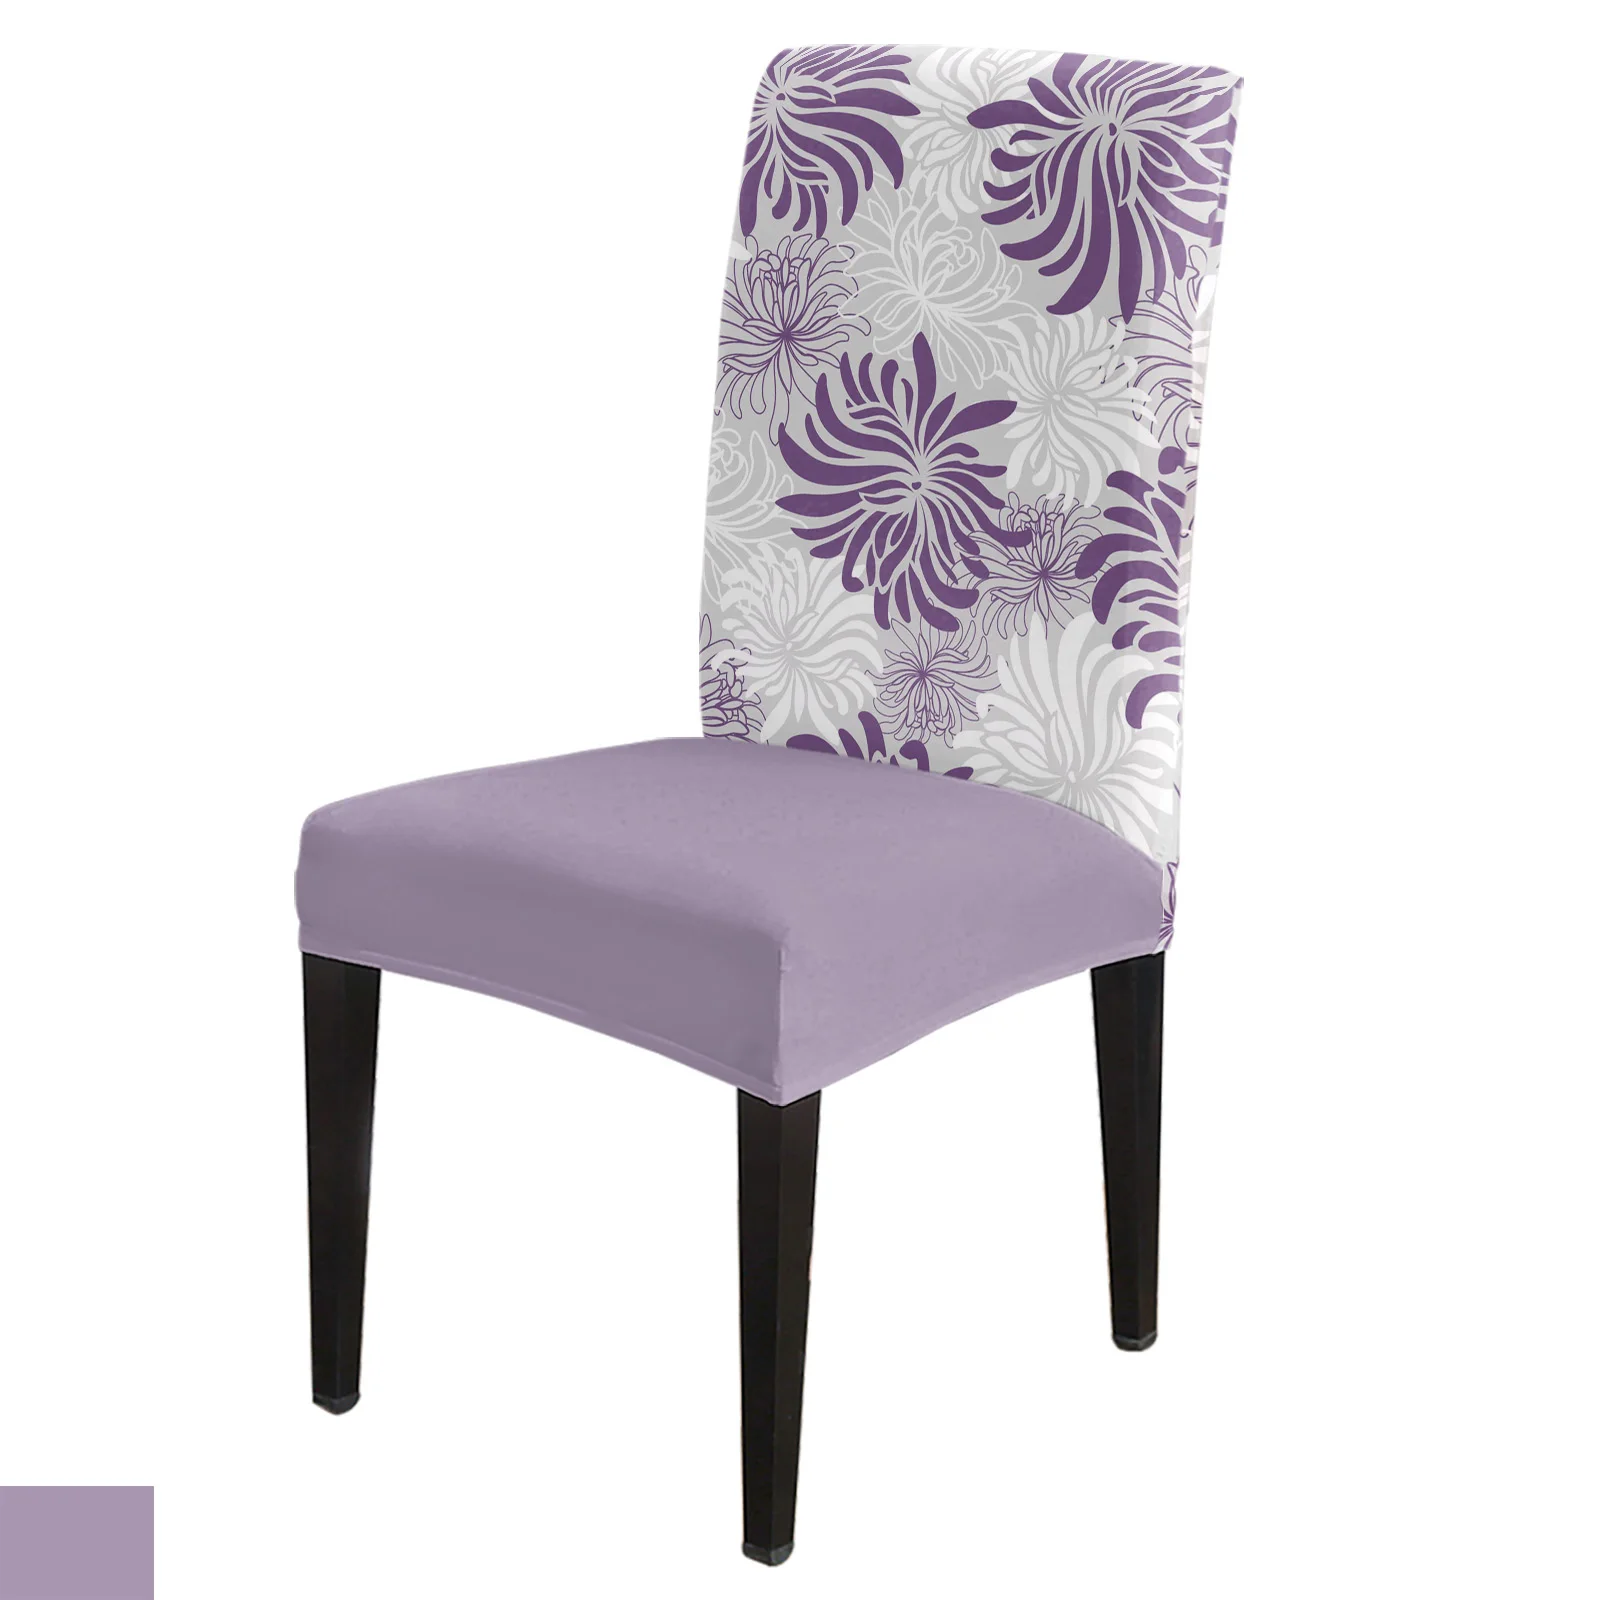 

Chrysanthemum Purple Texture Chair Covers Dining Room Weddings Banquet Stretch Chair Cover Kitchen Spandex Chair Cover